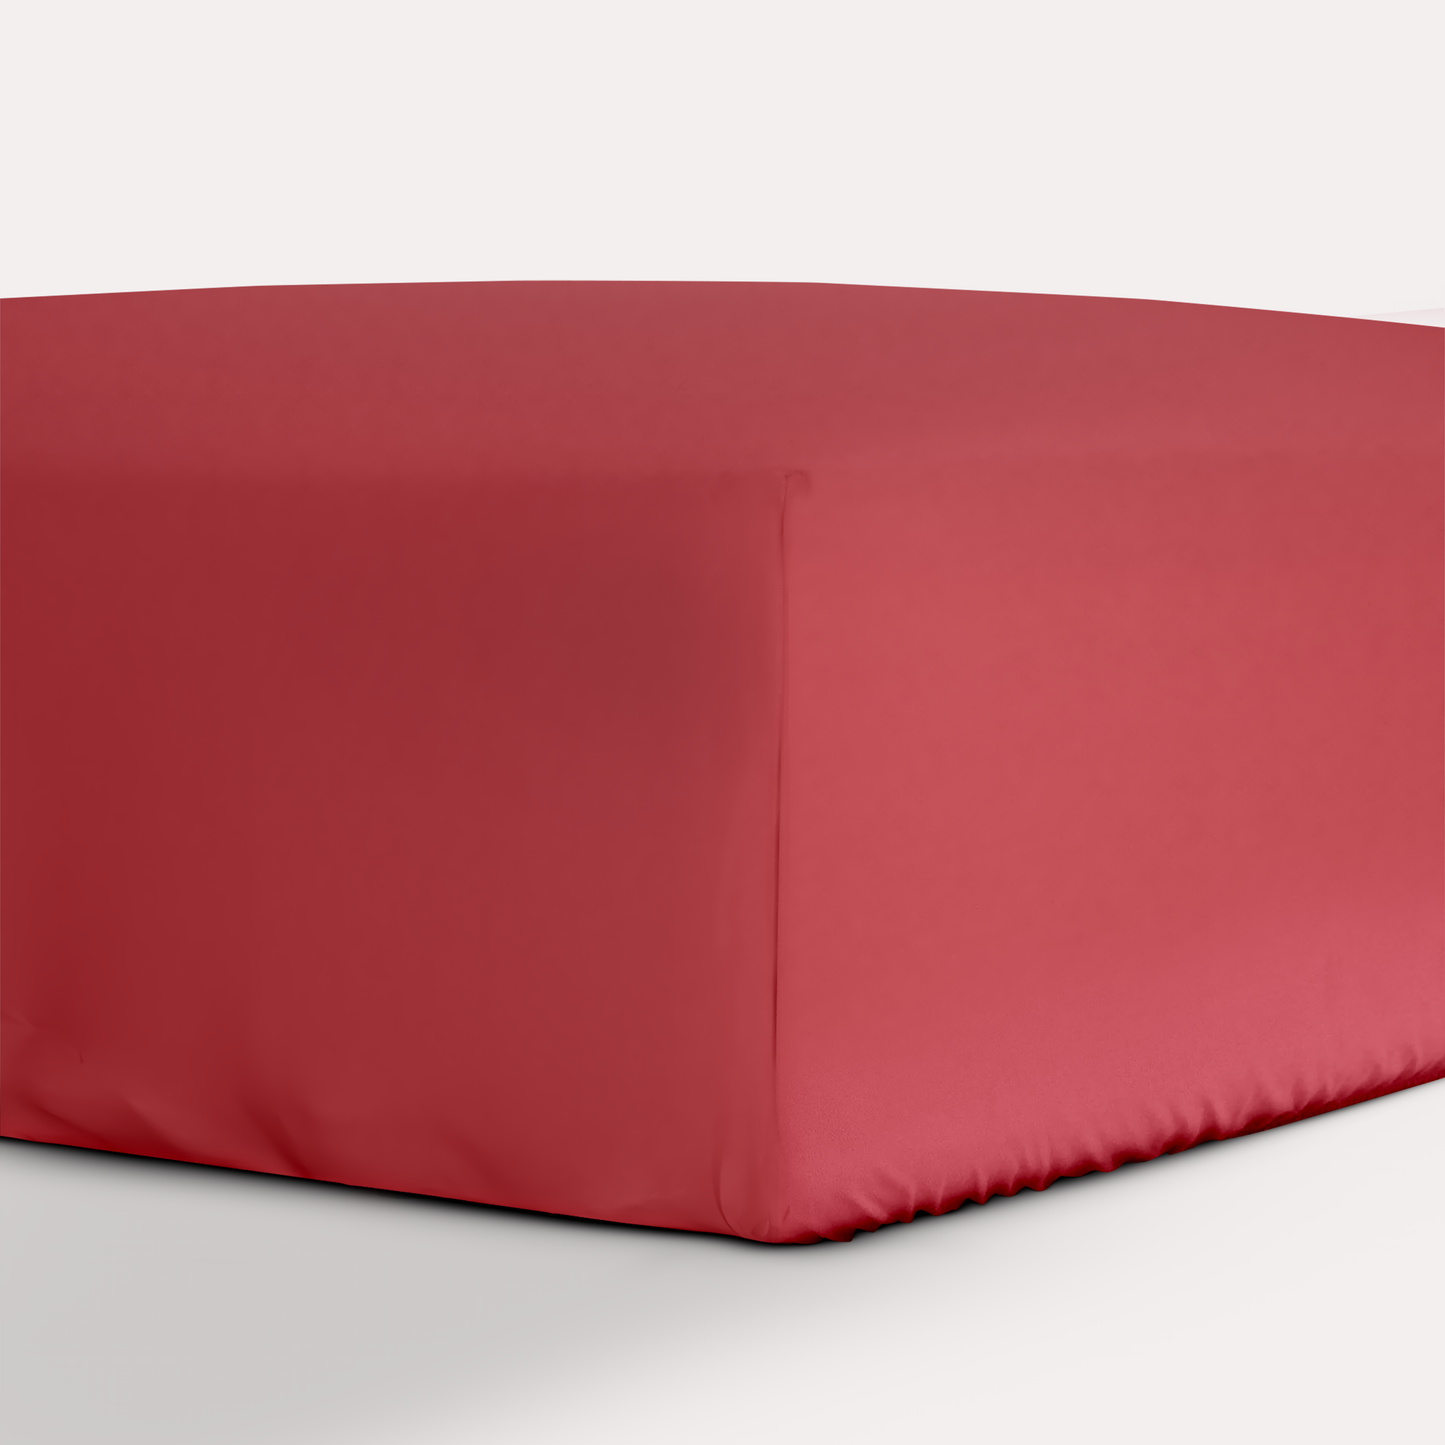 Classic Percale - Fitted Sheet Set- Carmine